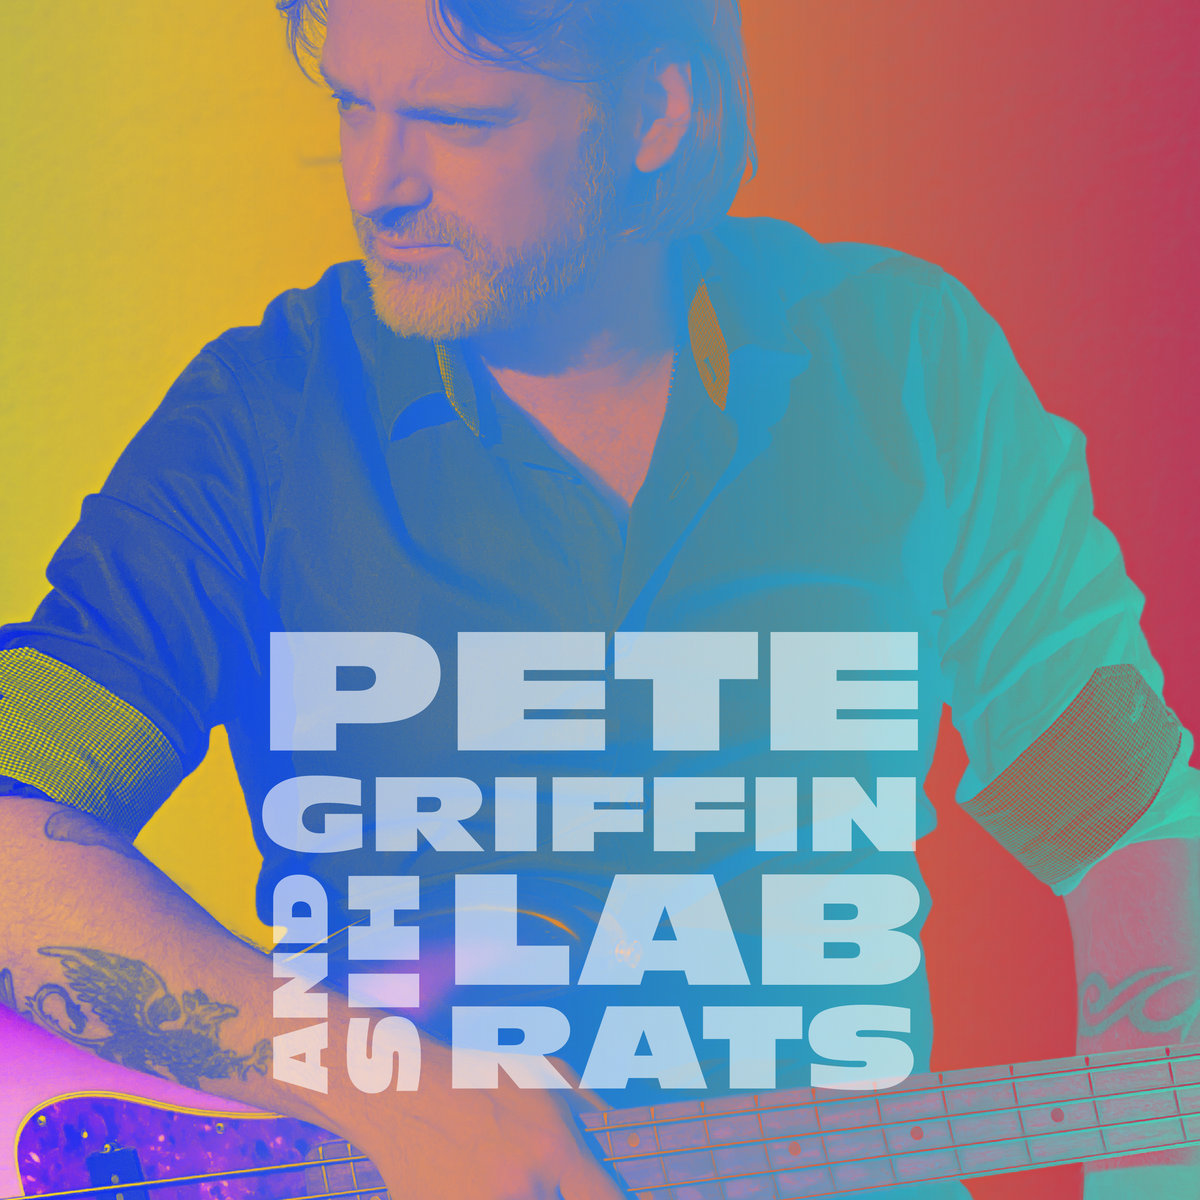 Pete Griffin and His Lab Rats